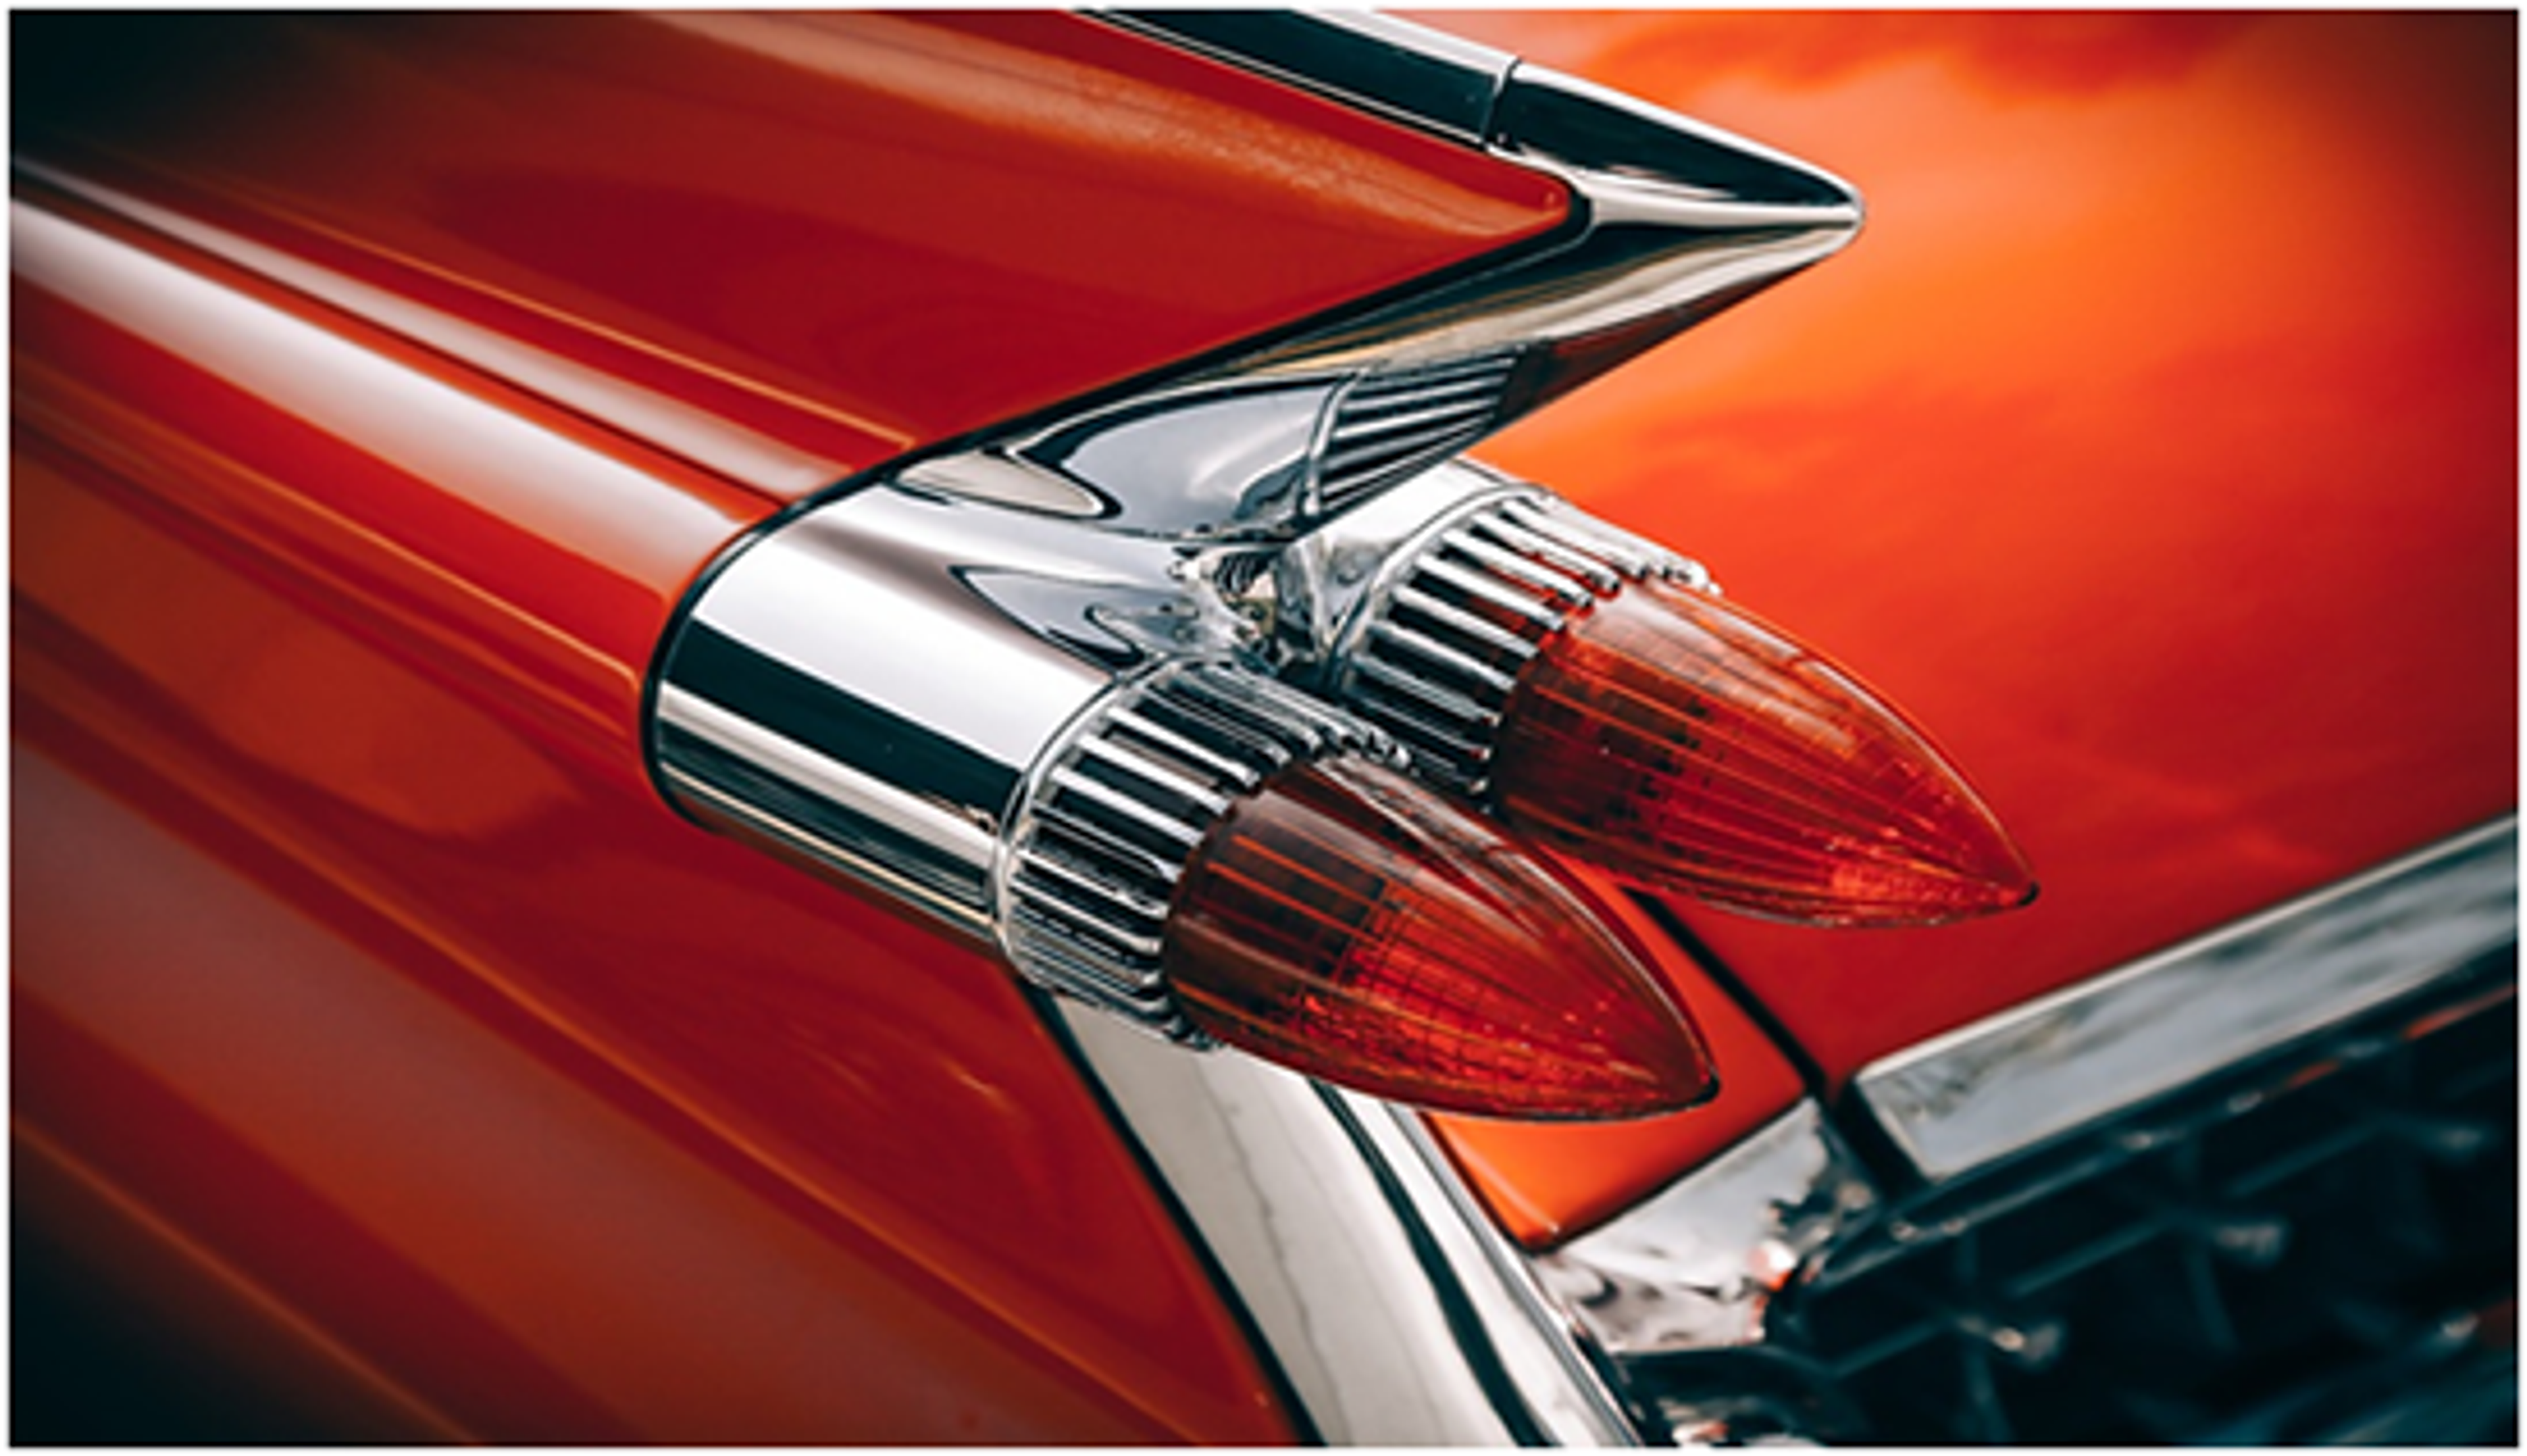 Car Protection Tips: Classic Car Storage